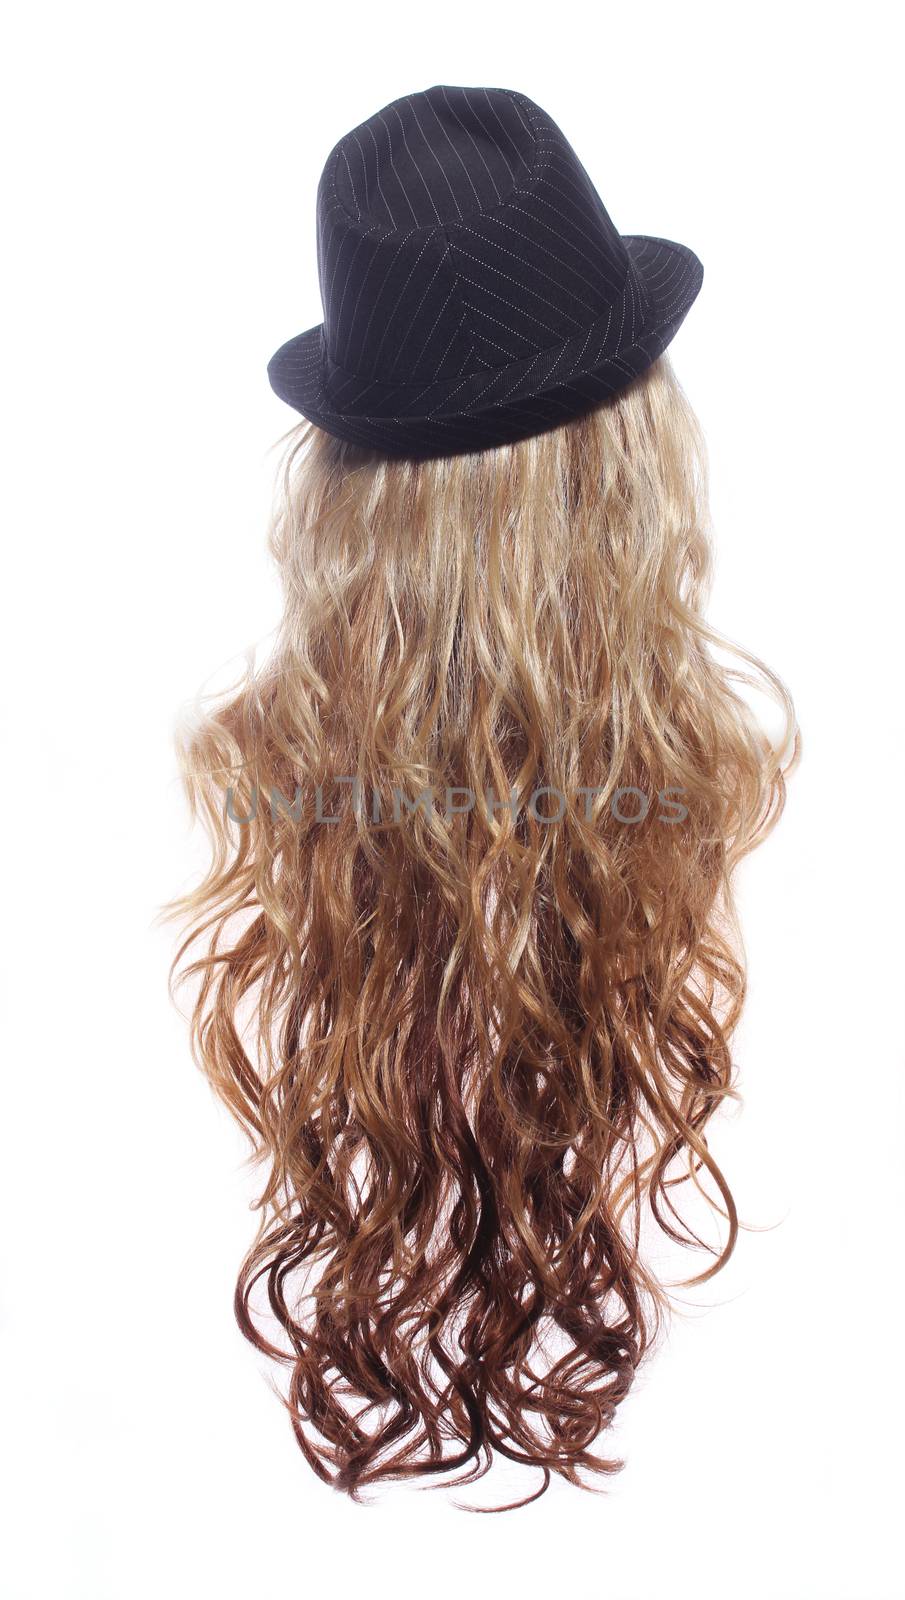 Classic Fedora Hat on Mannequin With Honey Blond Wig by Marti157900